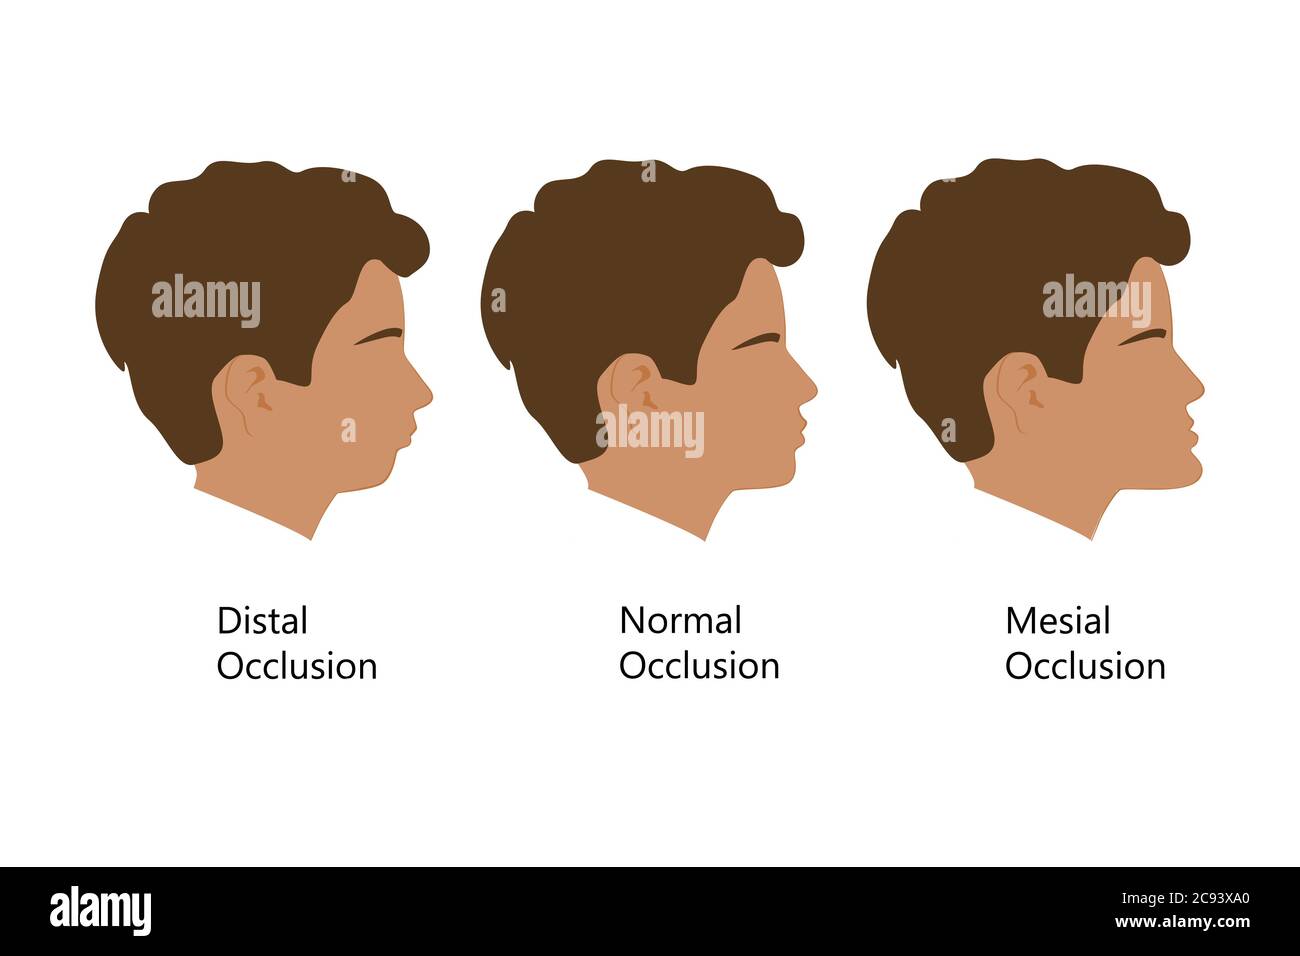 Guy with Distal, Normal, and Mesial bite profile, vector illustration. Overbite or underbite before and after orthodontic treatment. Human with Stock Vector